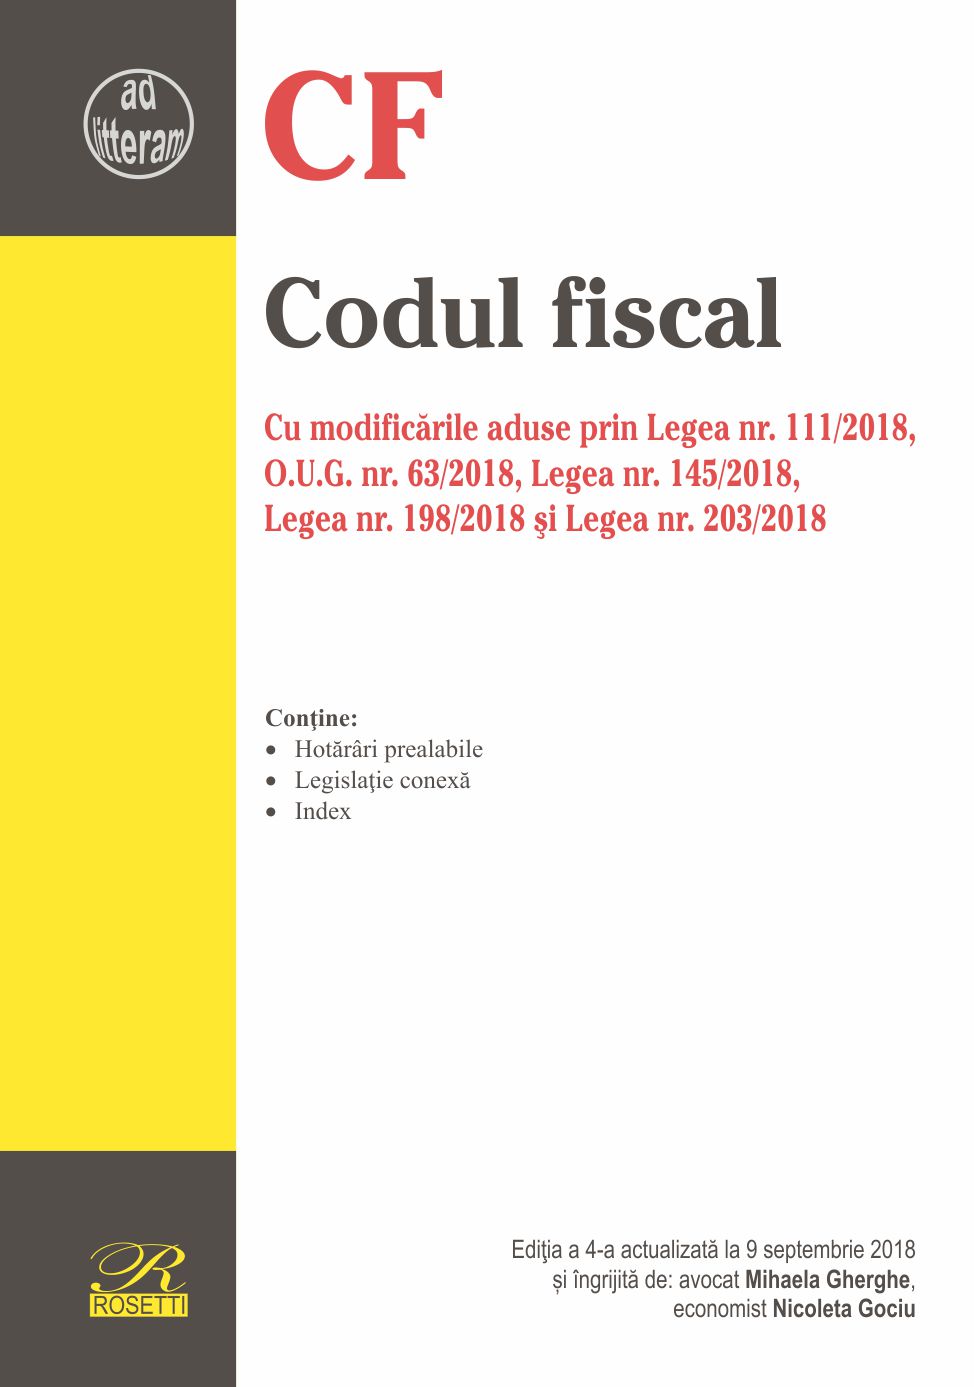 Codul fiscal Ed.4 Act. 9 Septembrie 2018